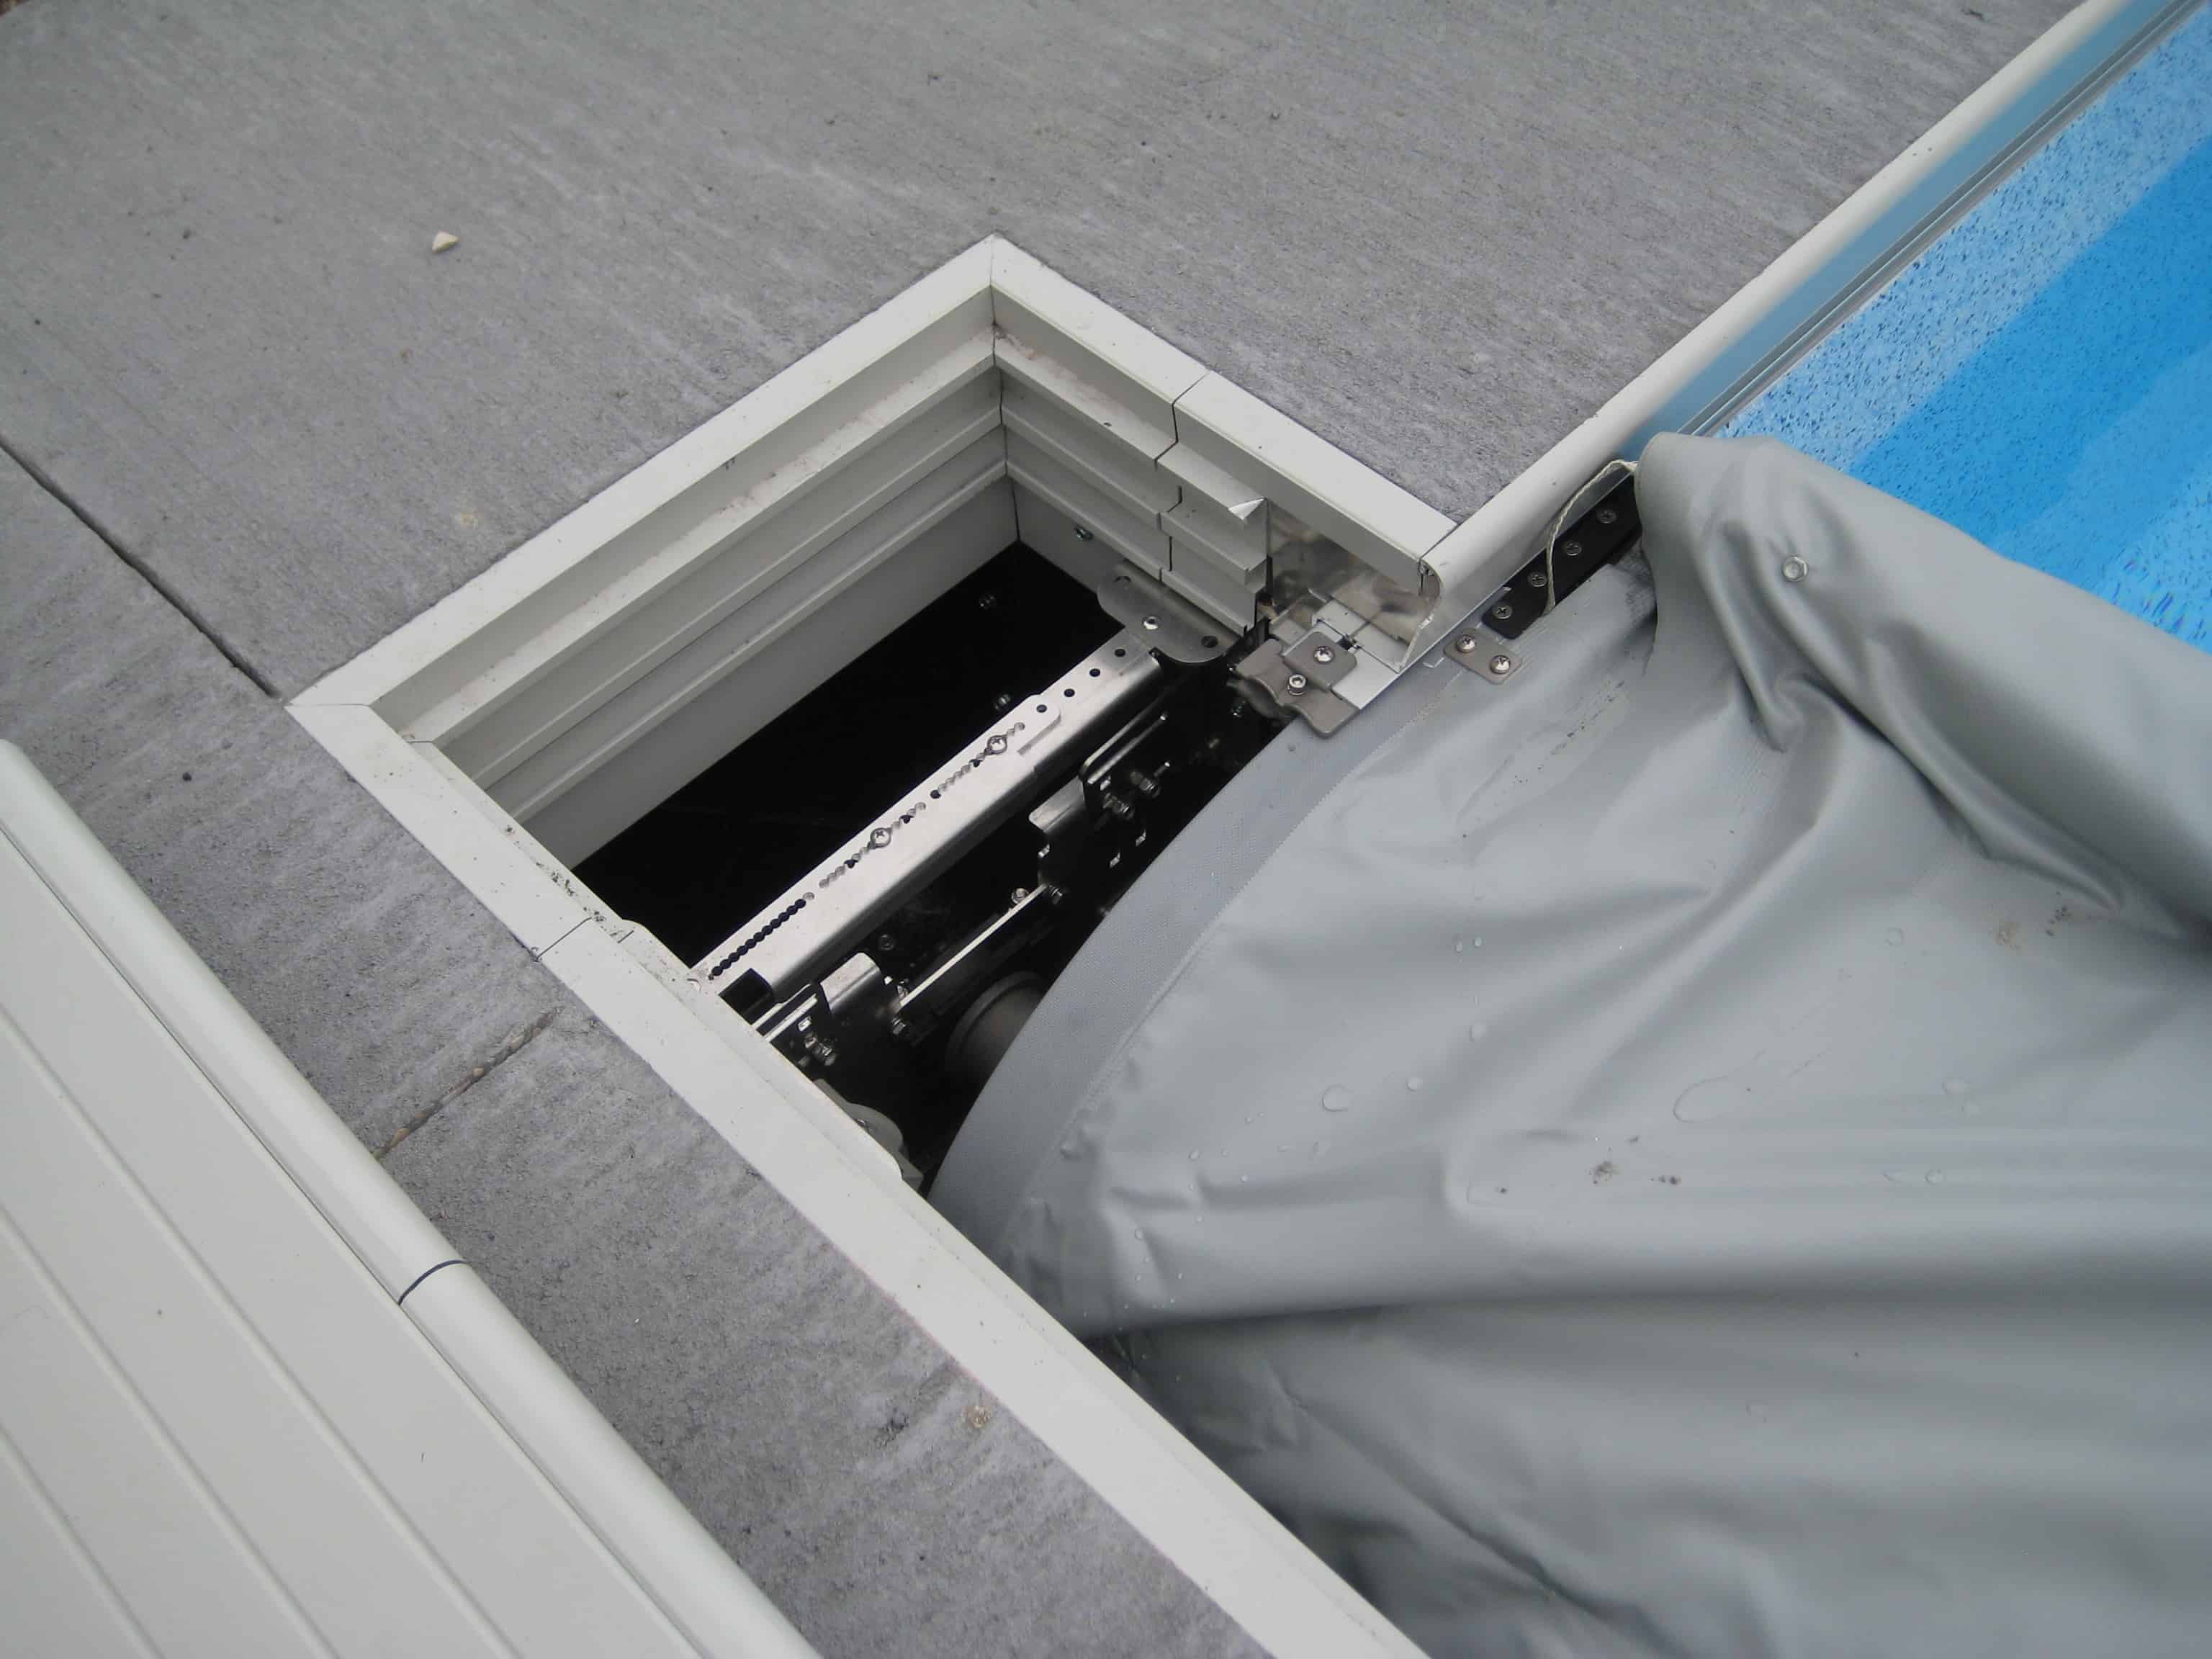 automatic pool cover dealers